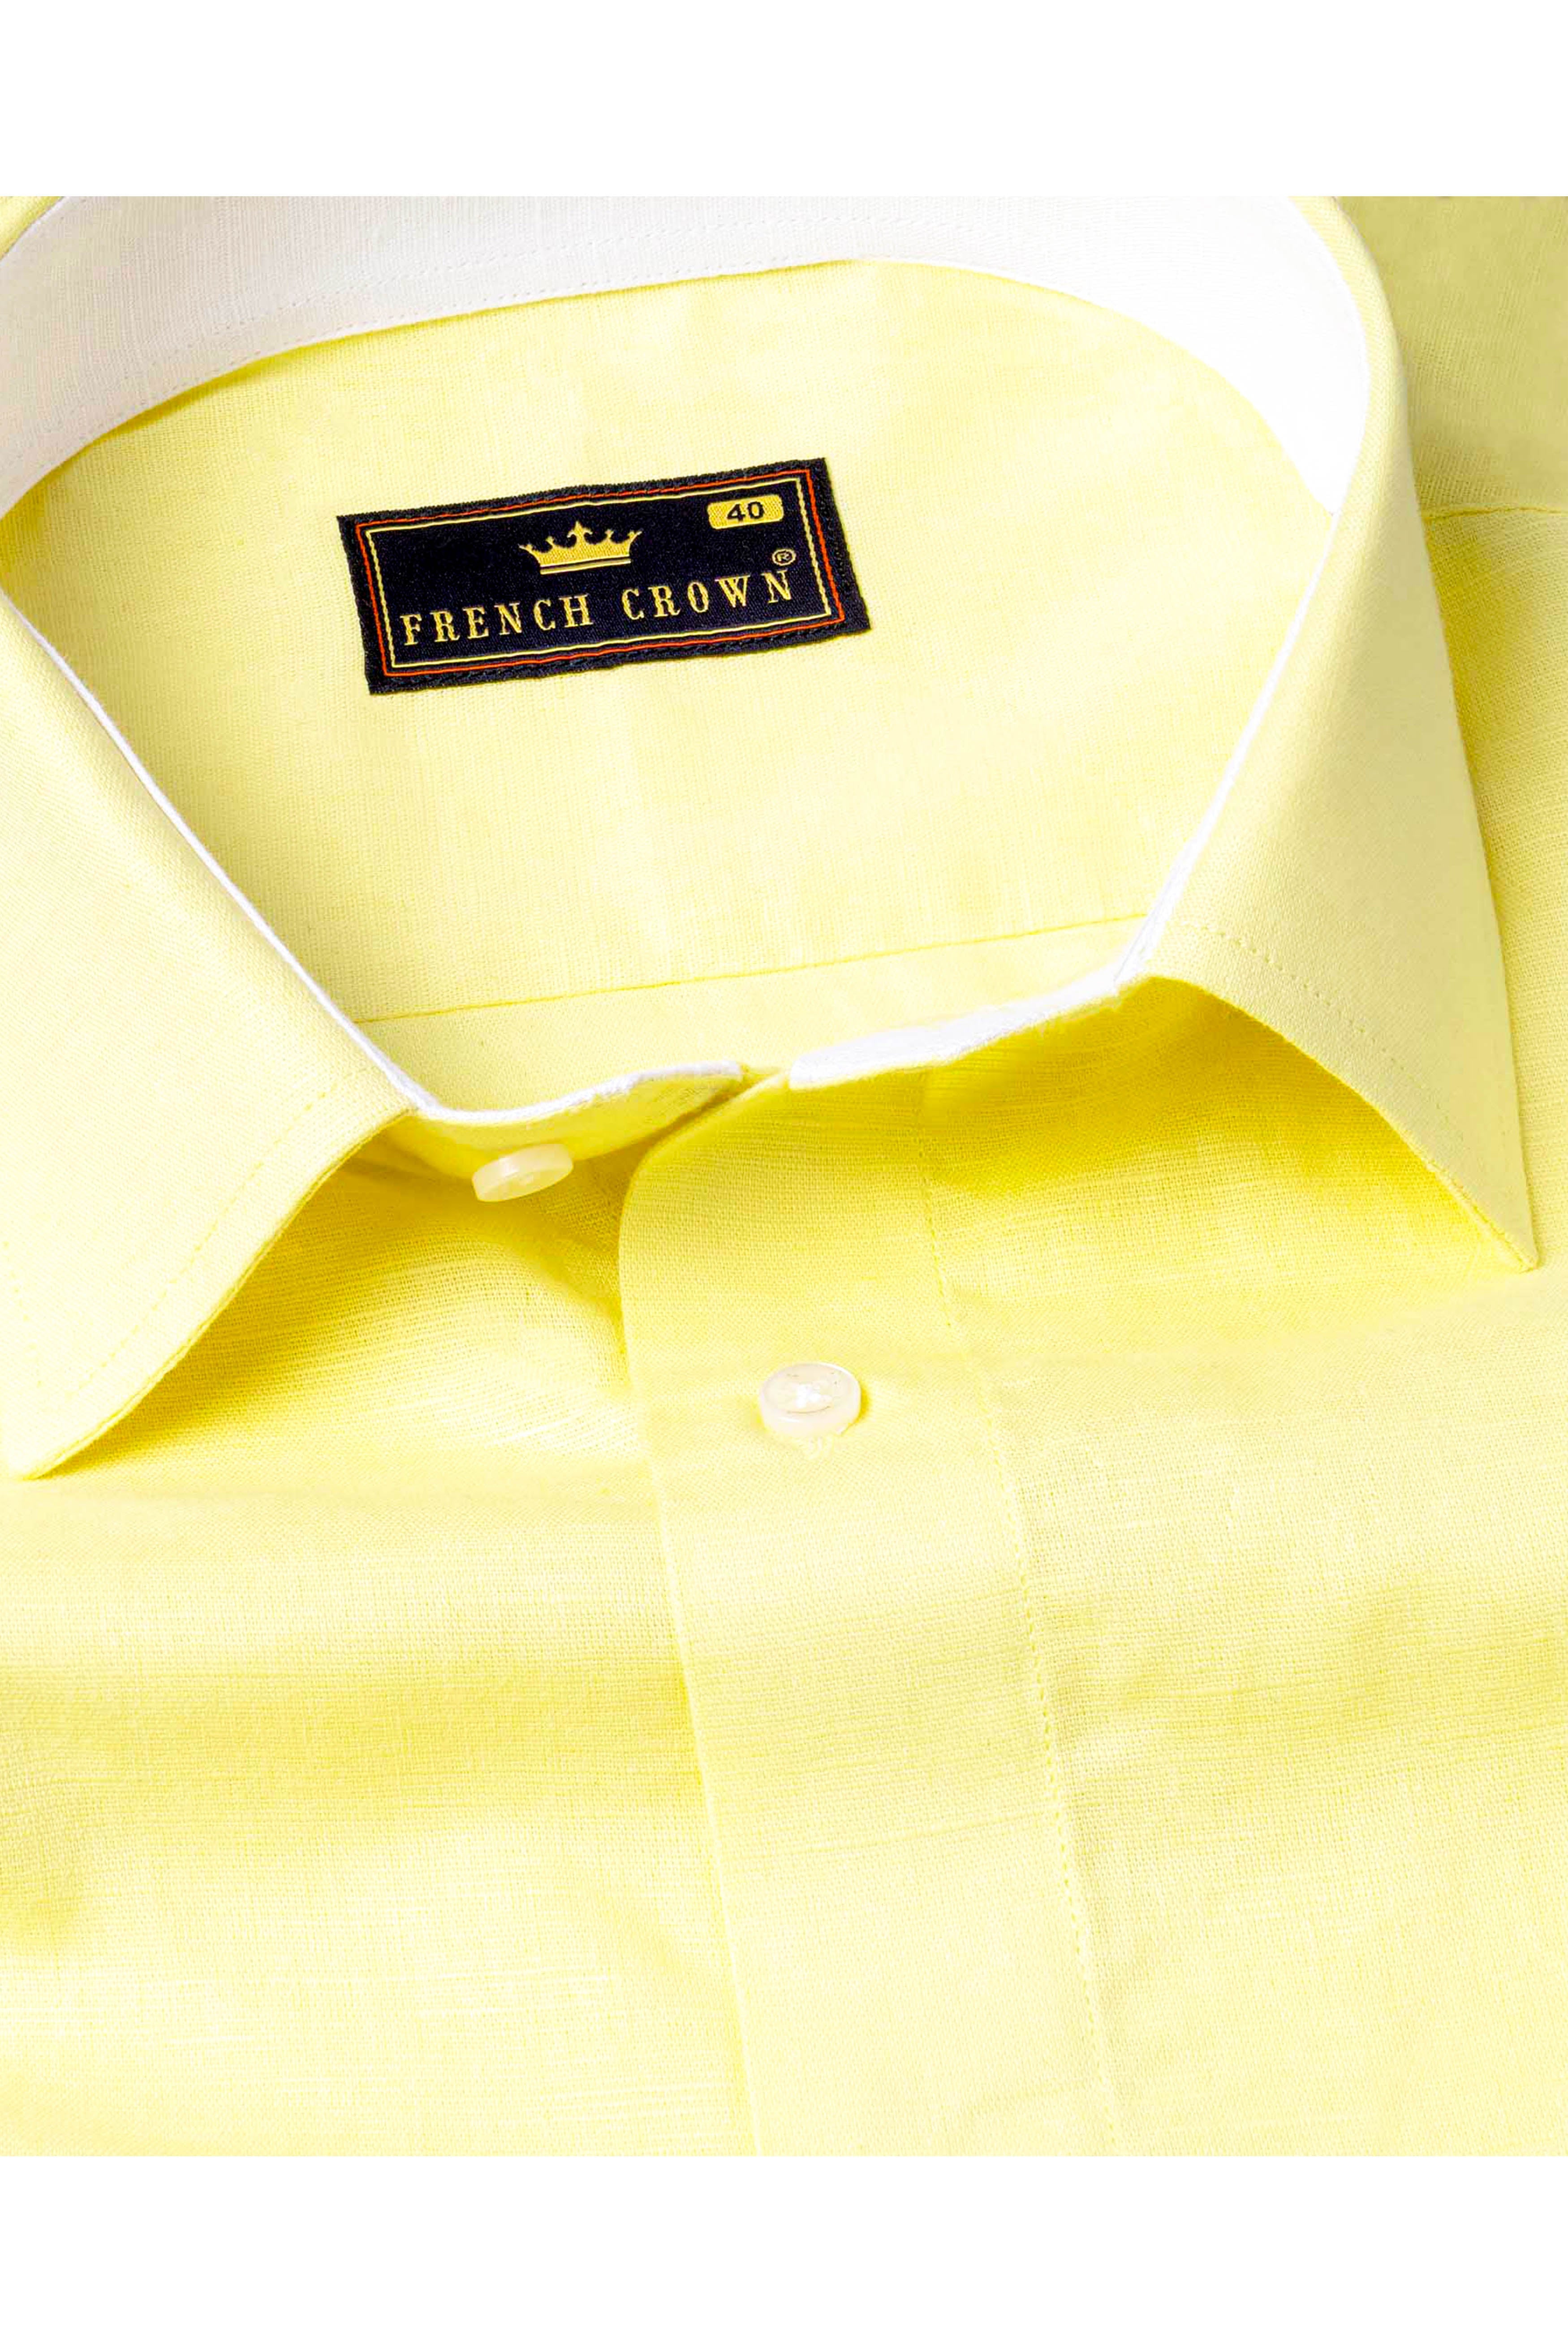 Picasso Yellow Hand Painted Luxurious Linen Shirt